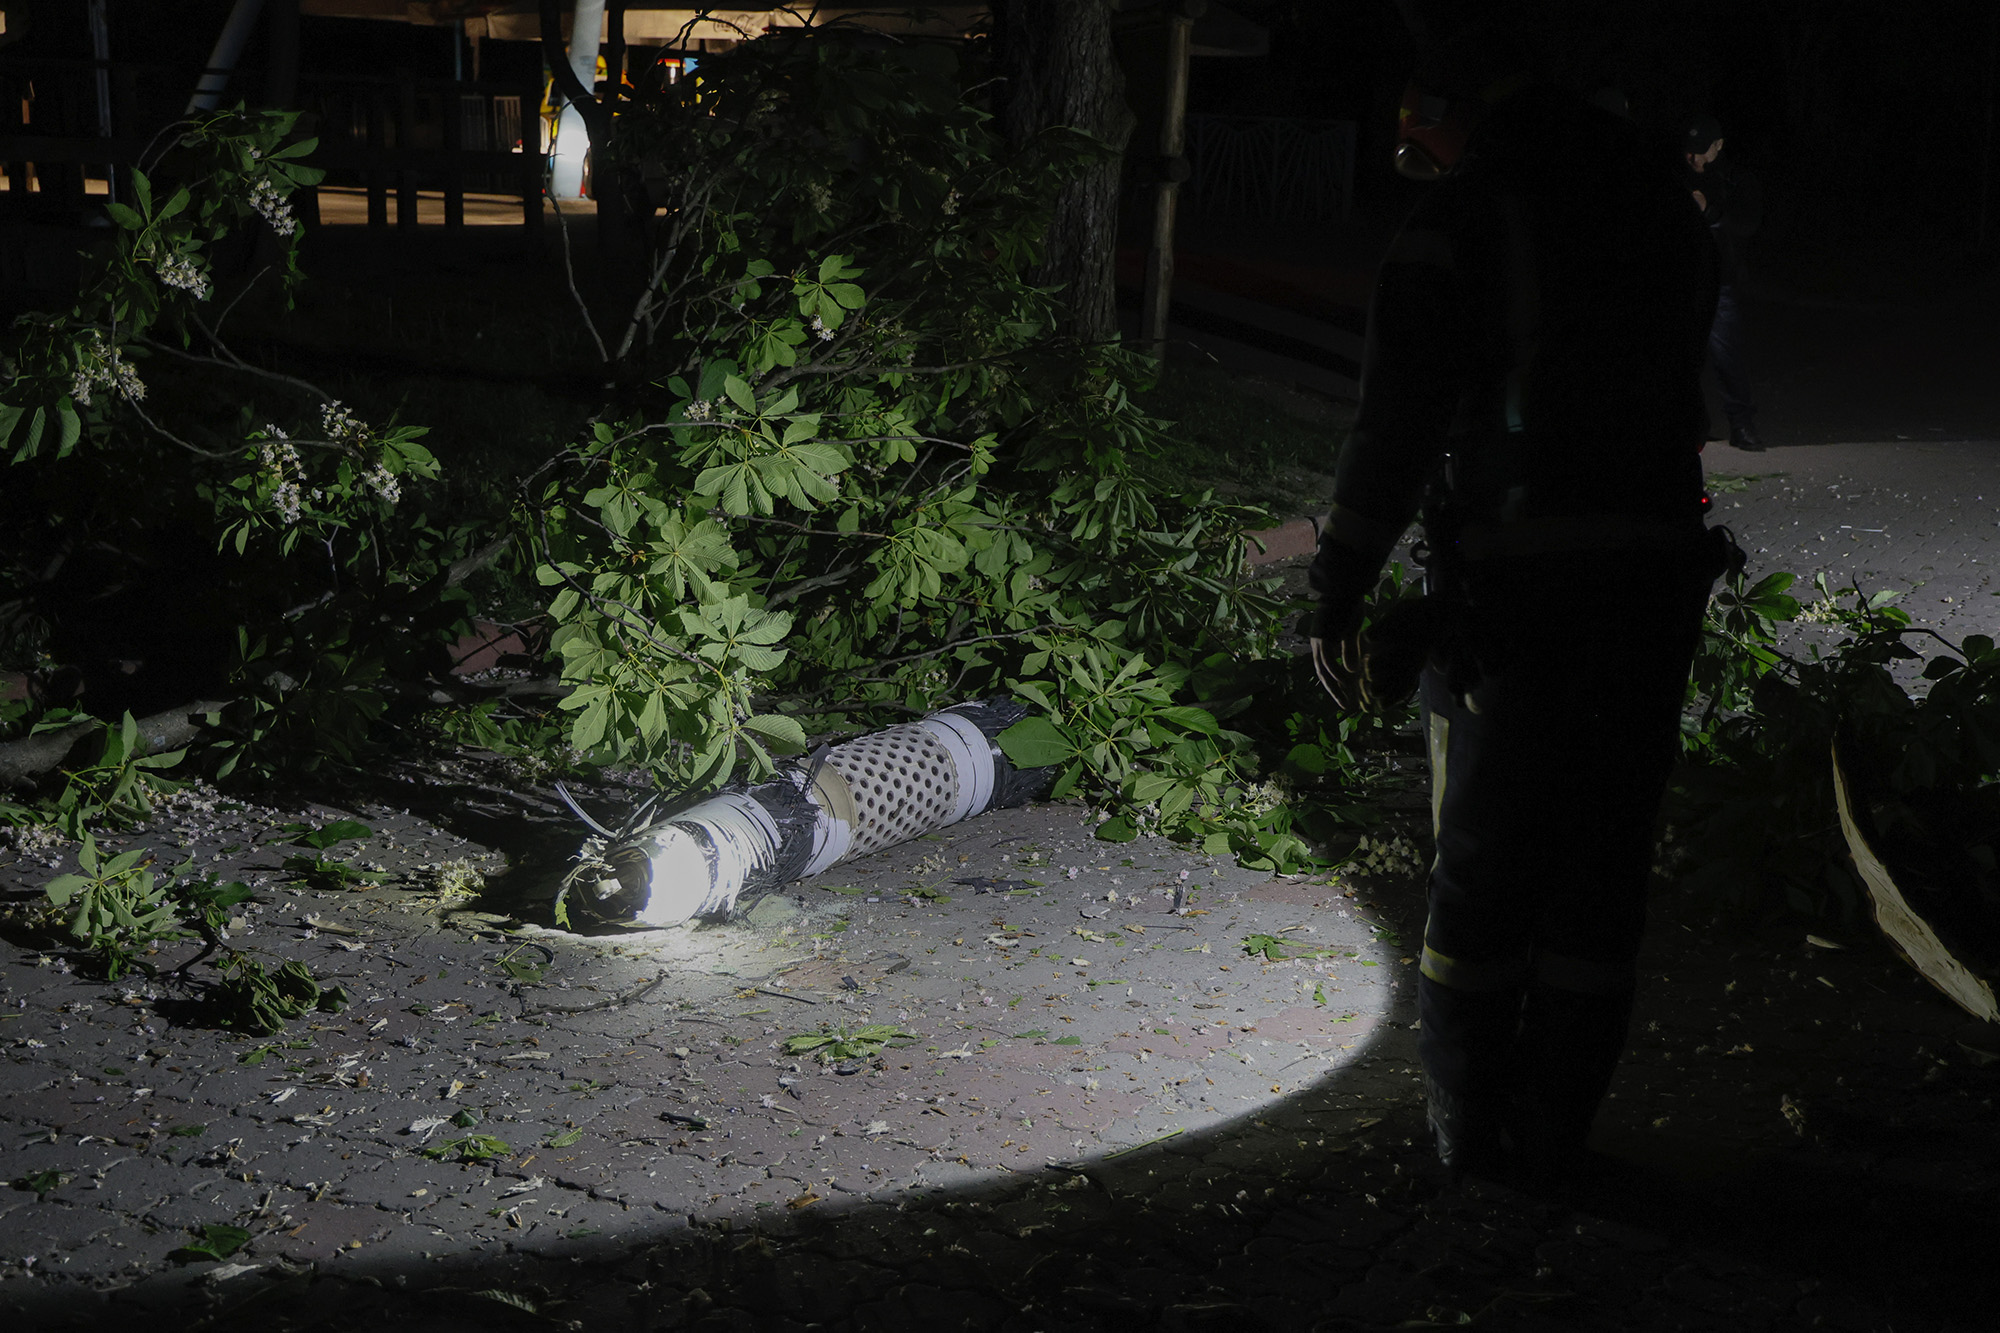 Police officers investigate fragments of a rocket that fell down in a city zoo after it was shot down by air defense system during the night in Kyiv, Ukraine, on May 16.